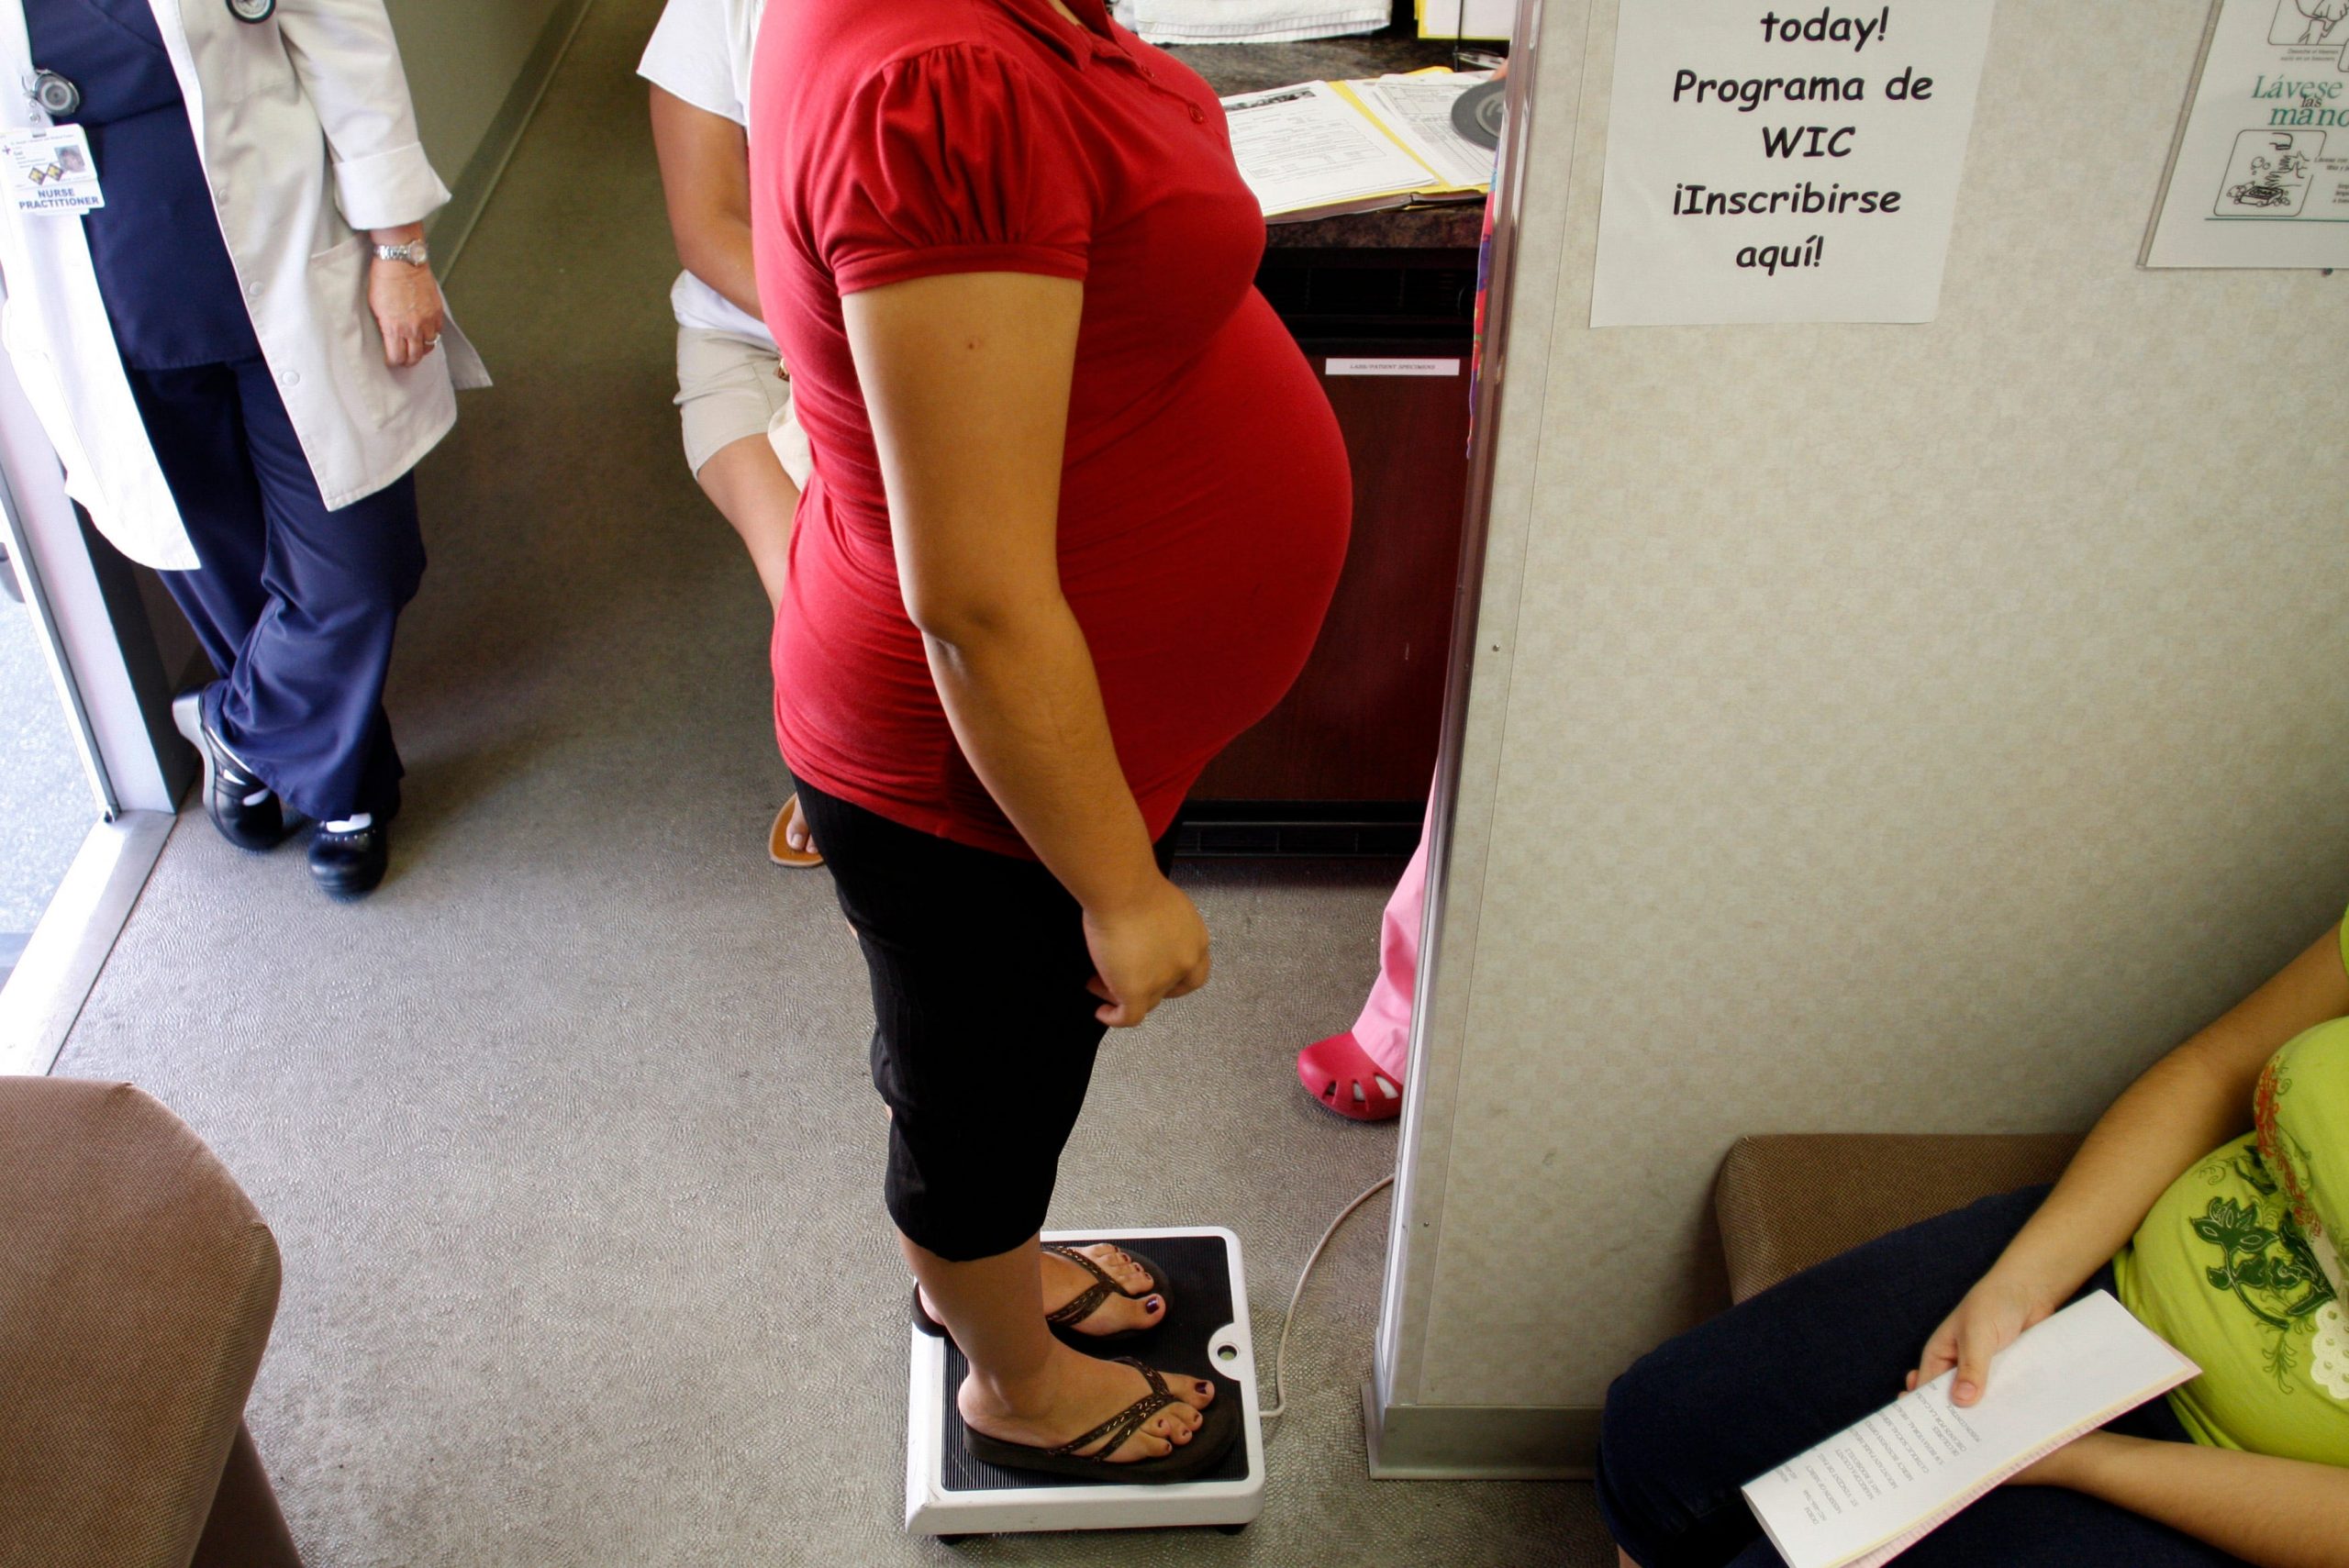 FILE PHOTO: A pregnant woman stands on a scale before receiving a prenatal exam at the Maternity Outreach Mobile in Phoenix, Arizona October 8, 2009. REUTERS/Joshua Lott 